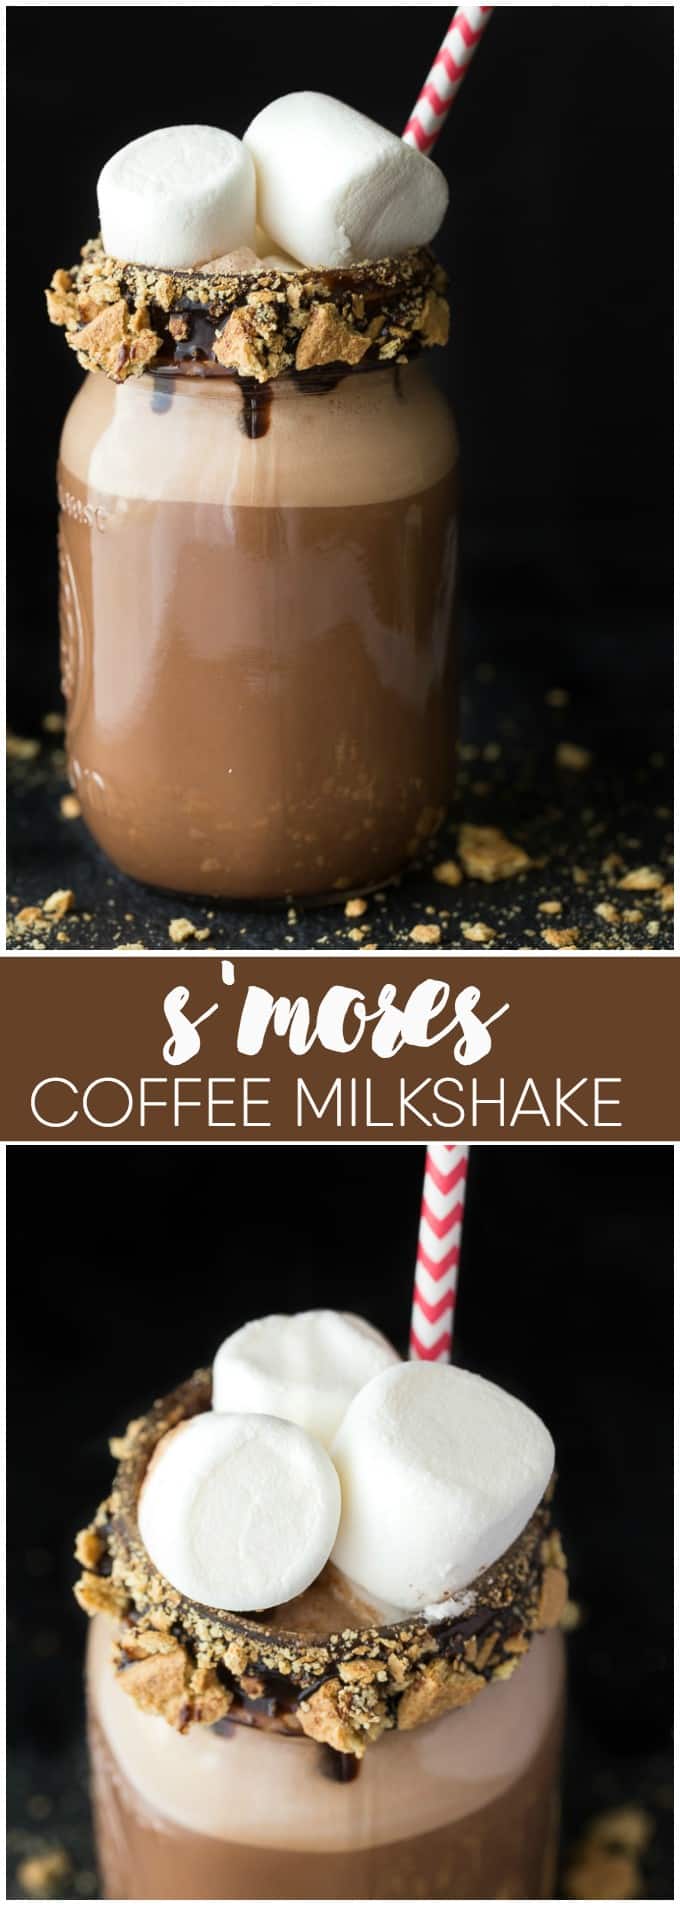 S'mores Coffee Milkshake - Everyone’s favourite campfire treat - s’mores, in a cool creamy drink! Made with chocolate ice cream, black coffee, marshmallow creme and chocolate syrup, this will make you want to pull a chair up to the firepit!S'mores Coffee Milkshake - Rich, creamy and perfectly sweet! You'll love this delicious summer drink to help you beat the heat.